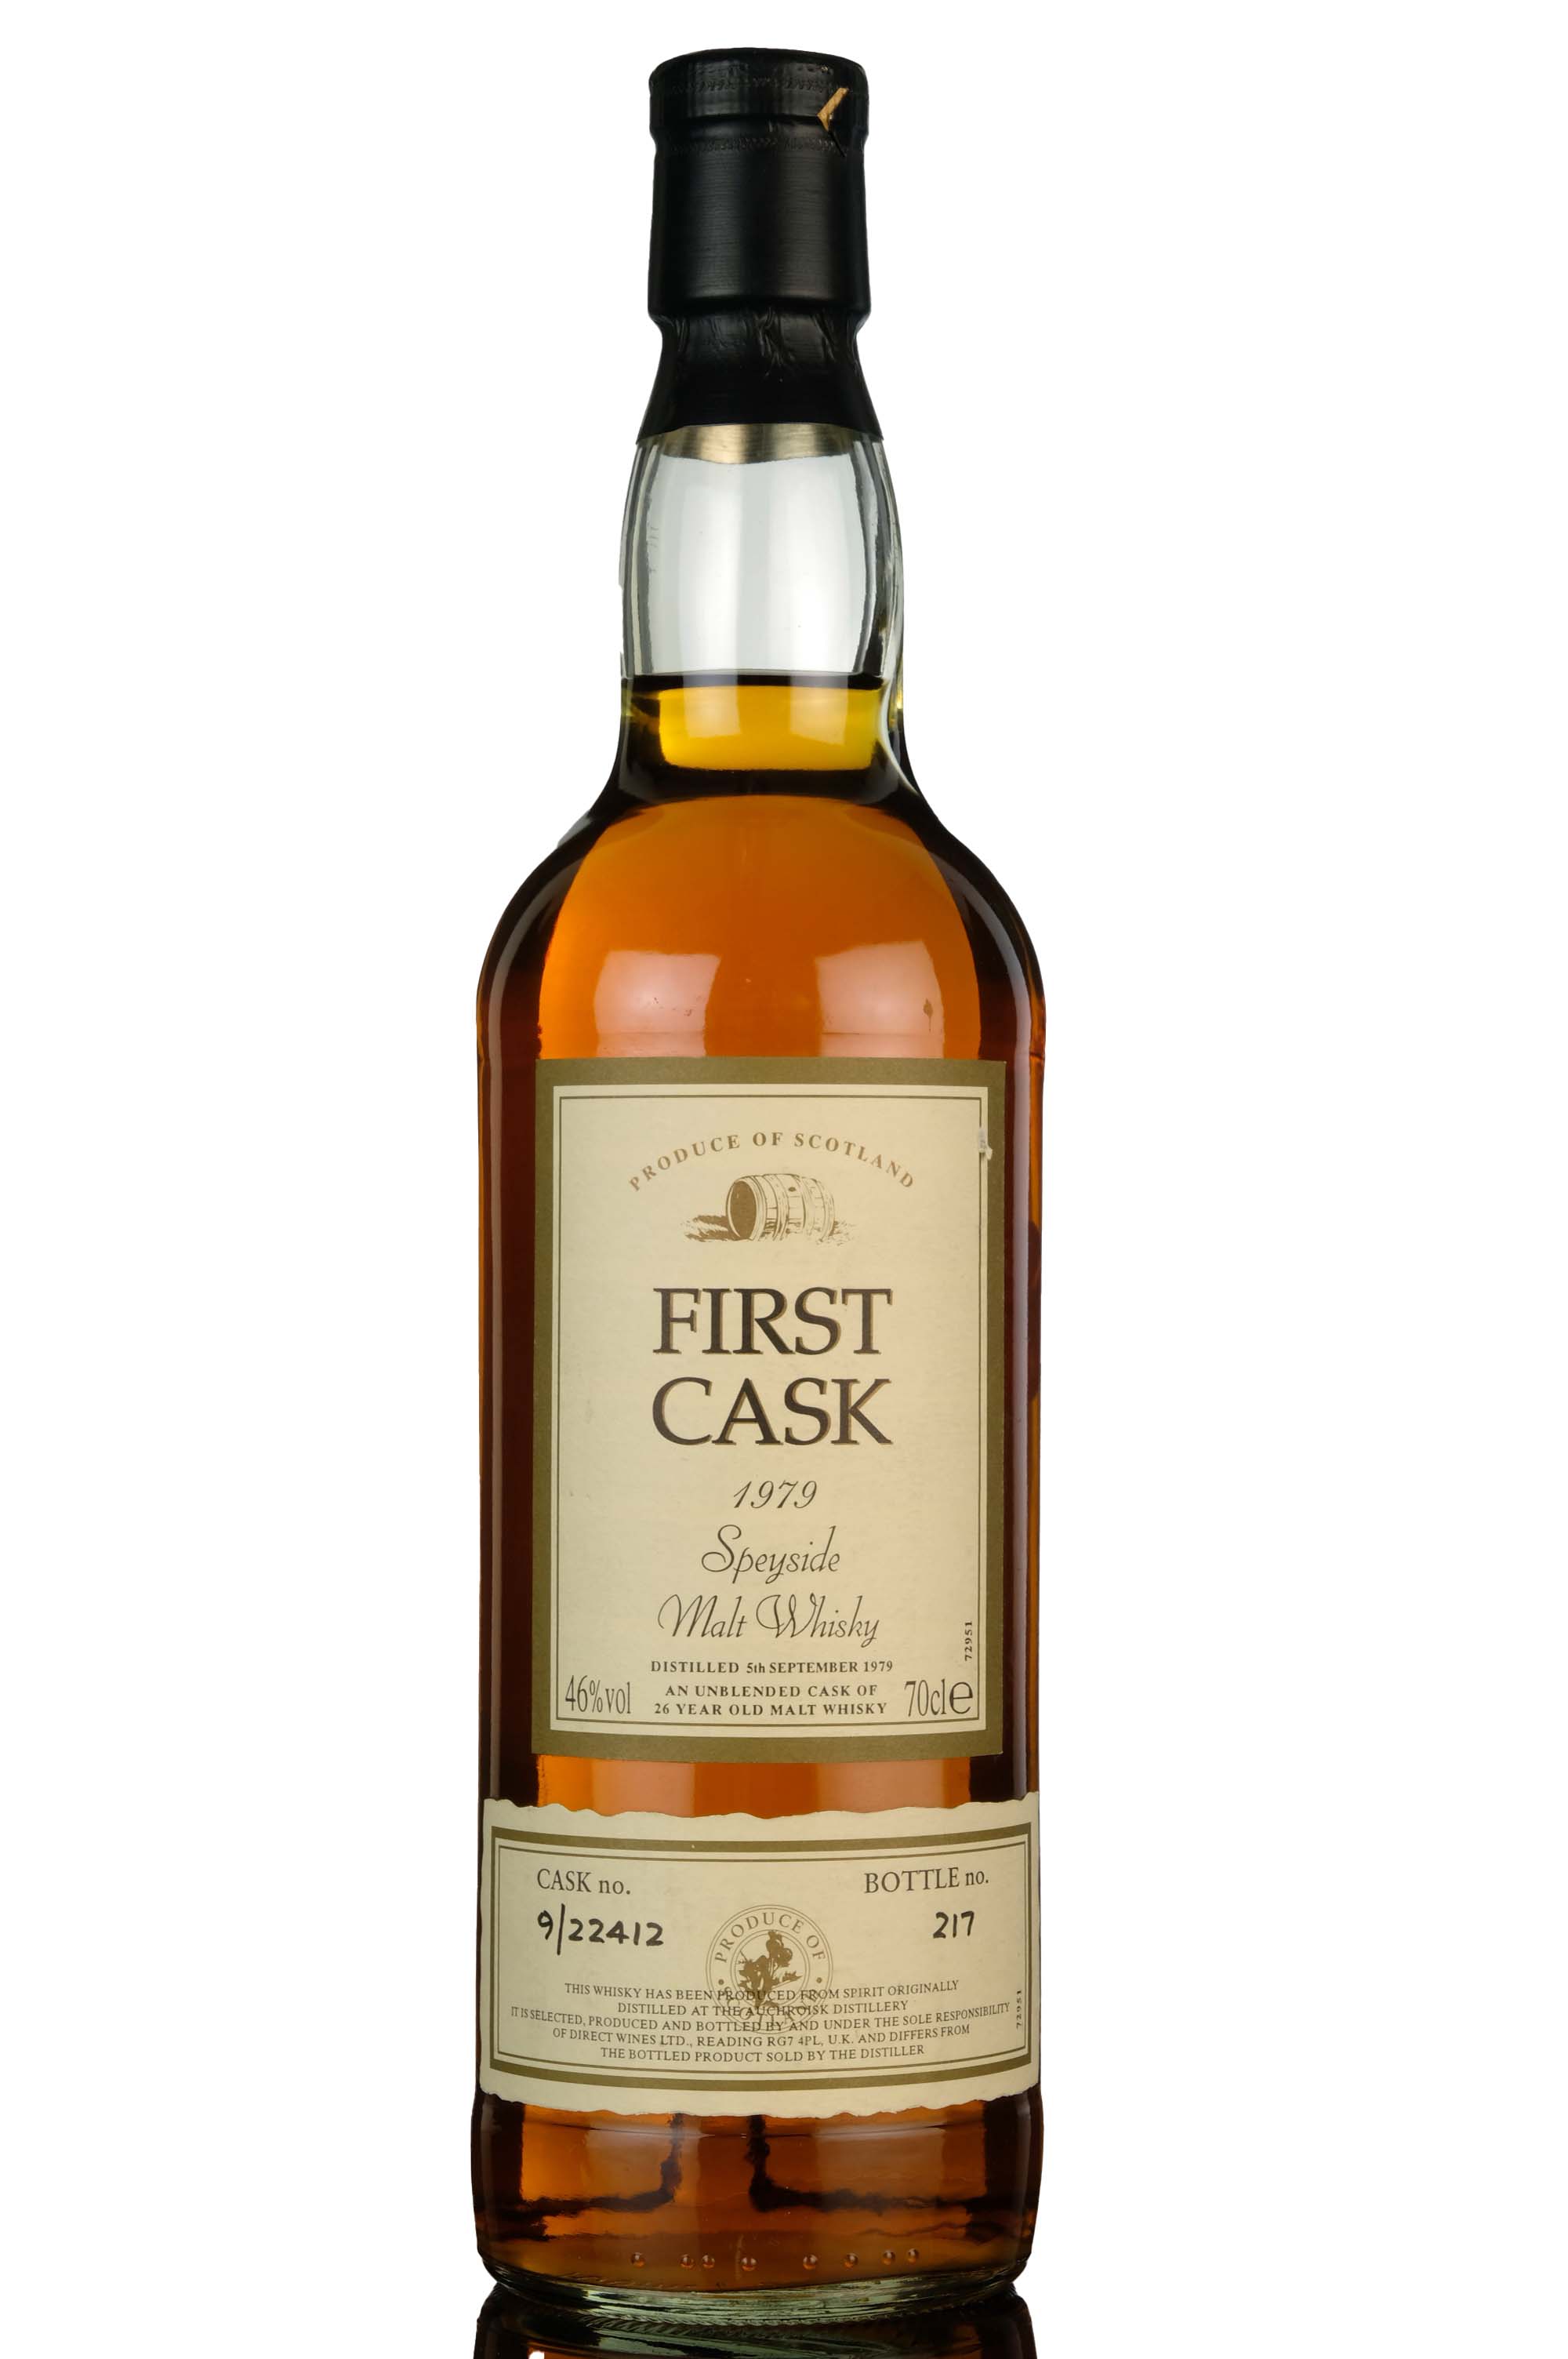 Auchroisk 1979 - 26 Year Old - First Cask - Single Cask 9/22412